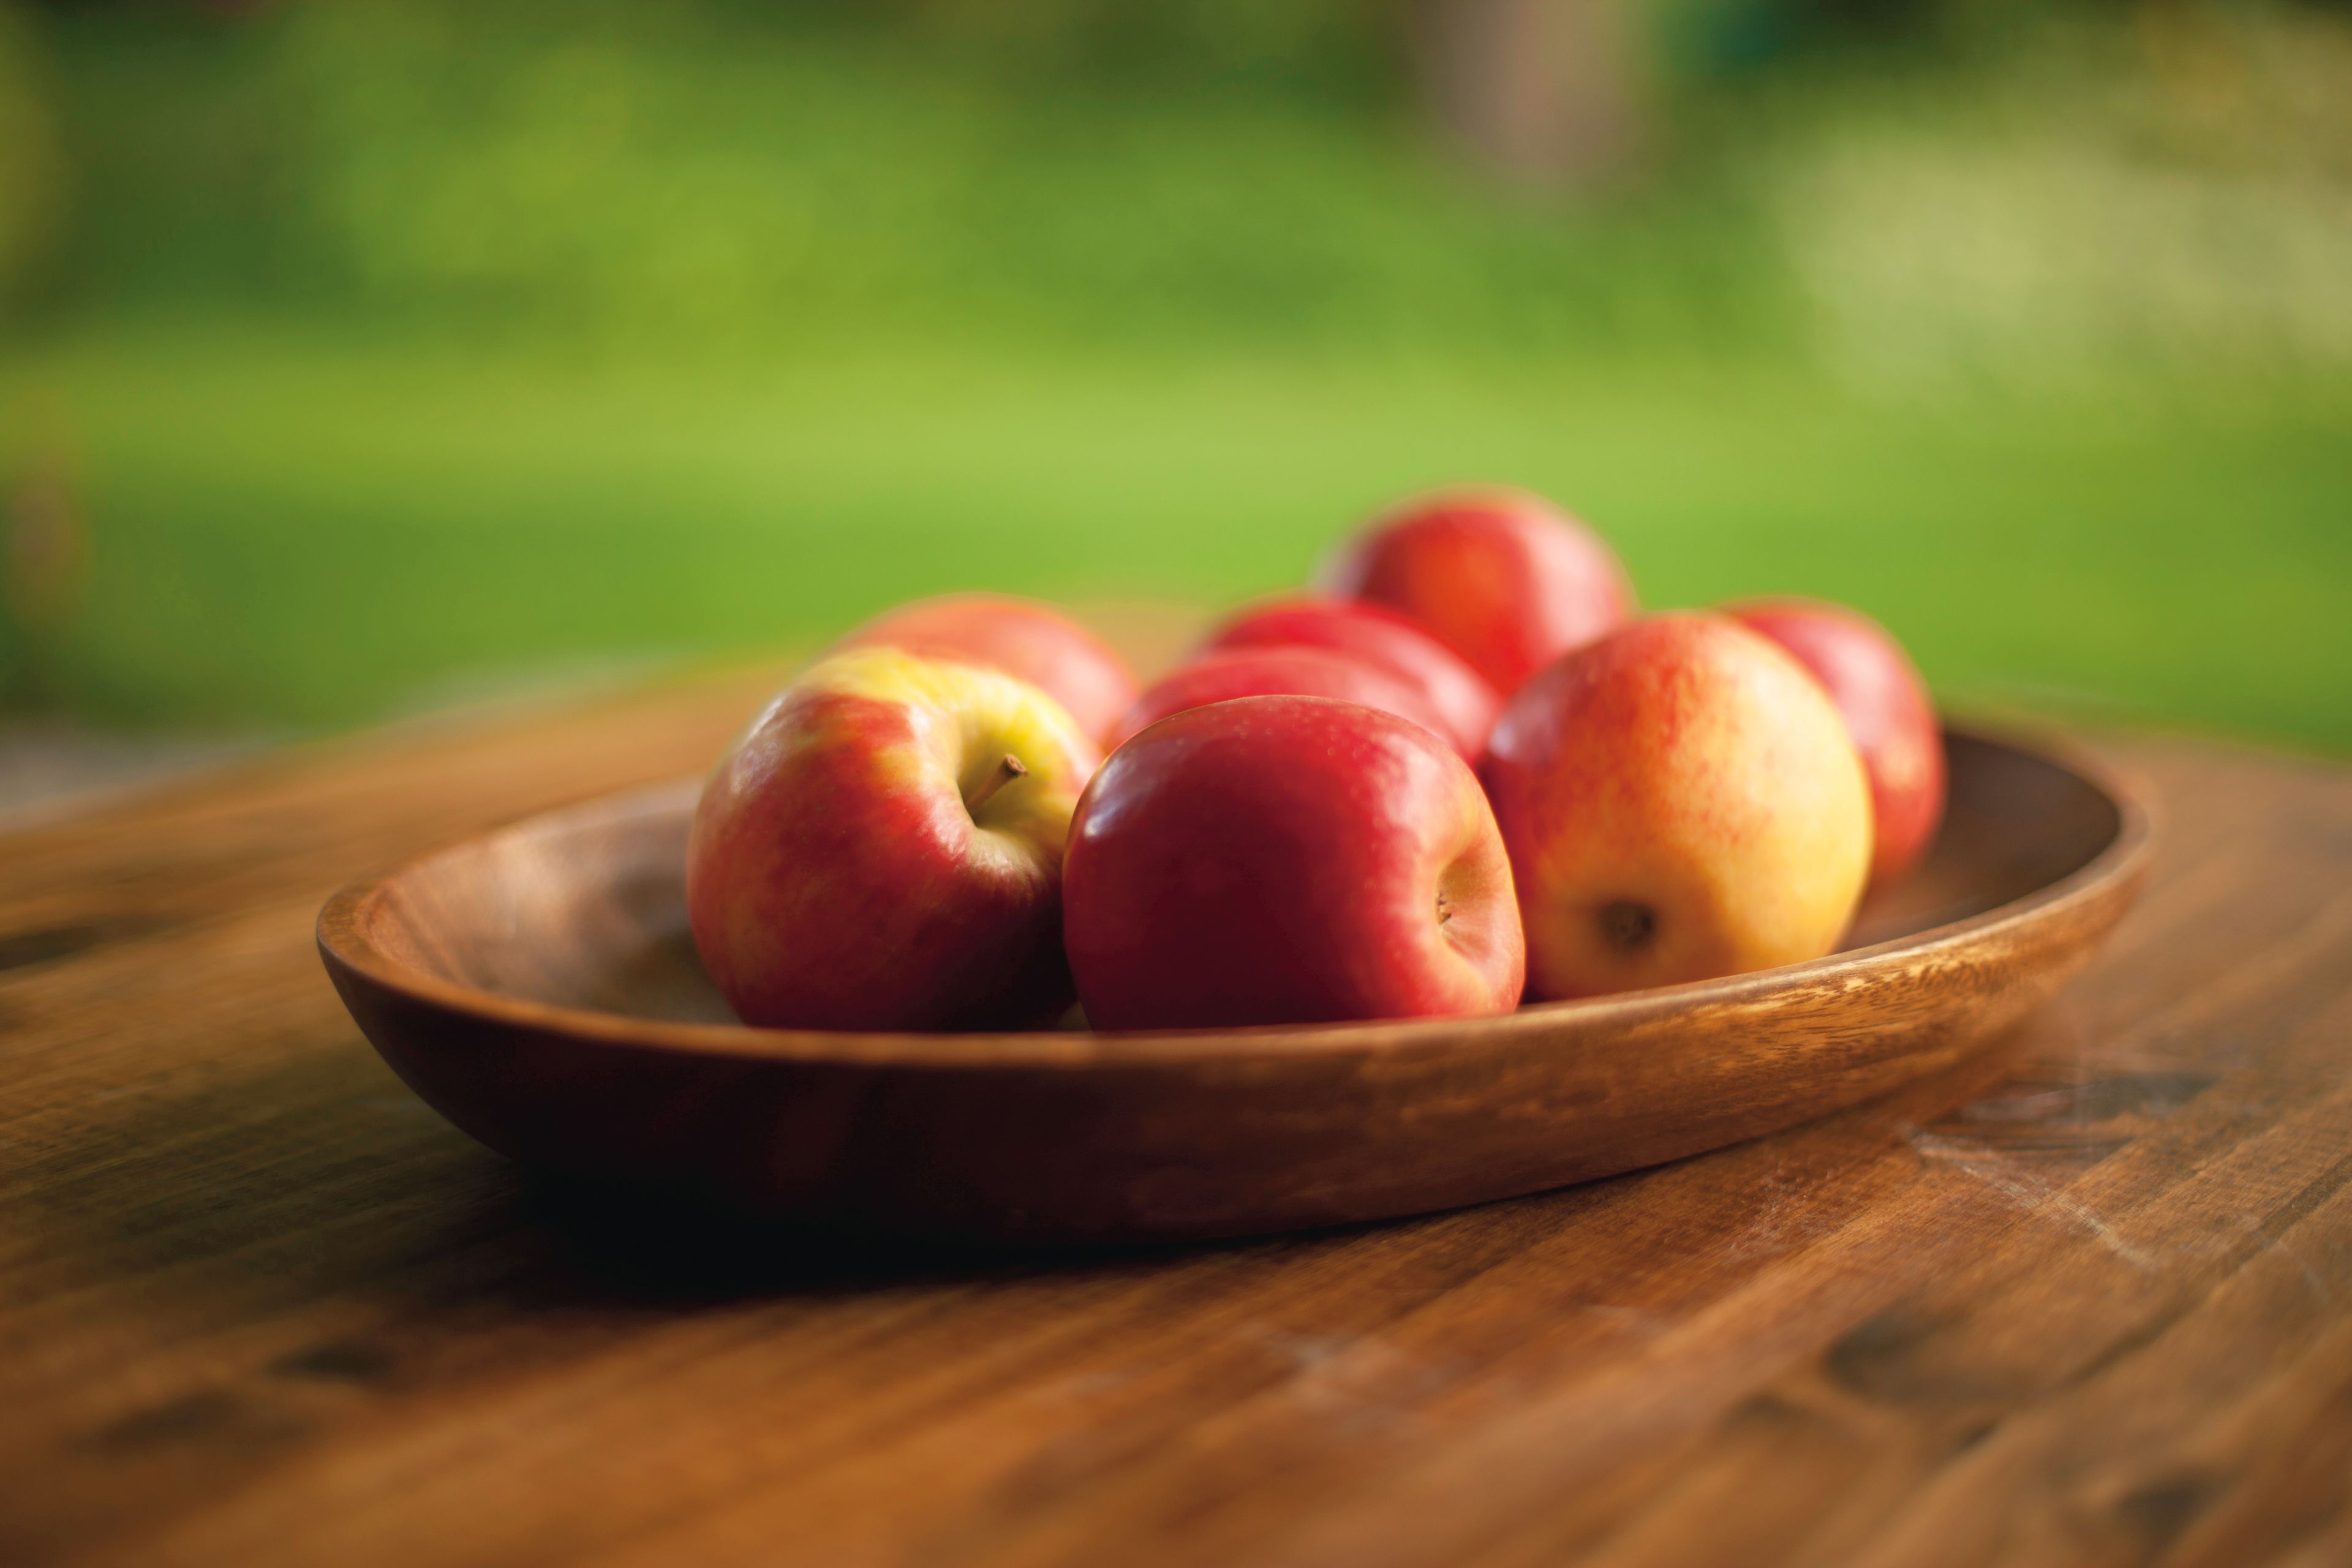 Apples in a wooden bowl.